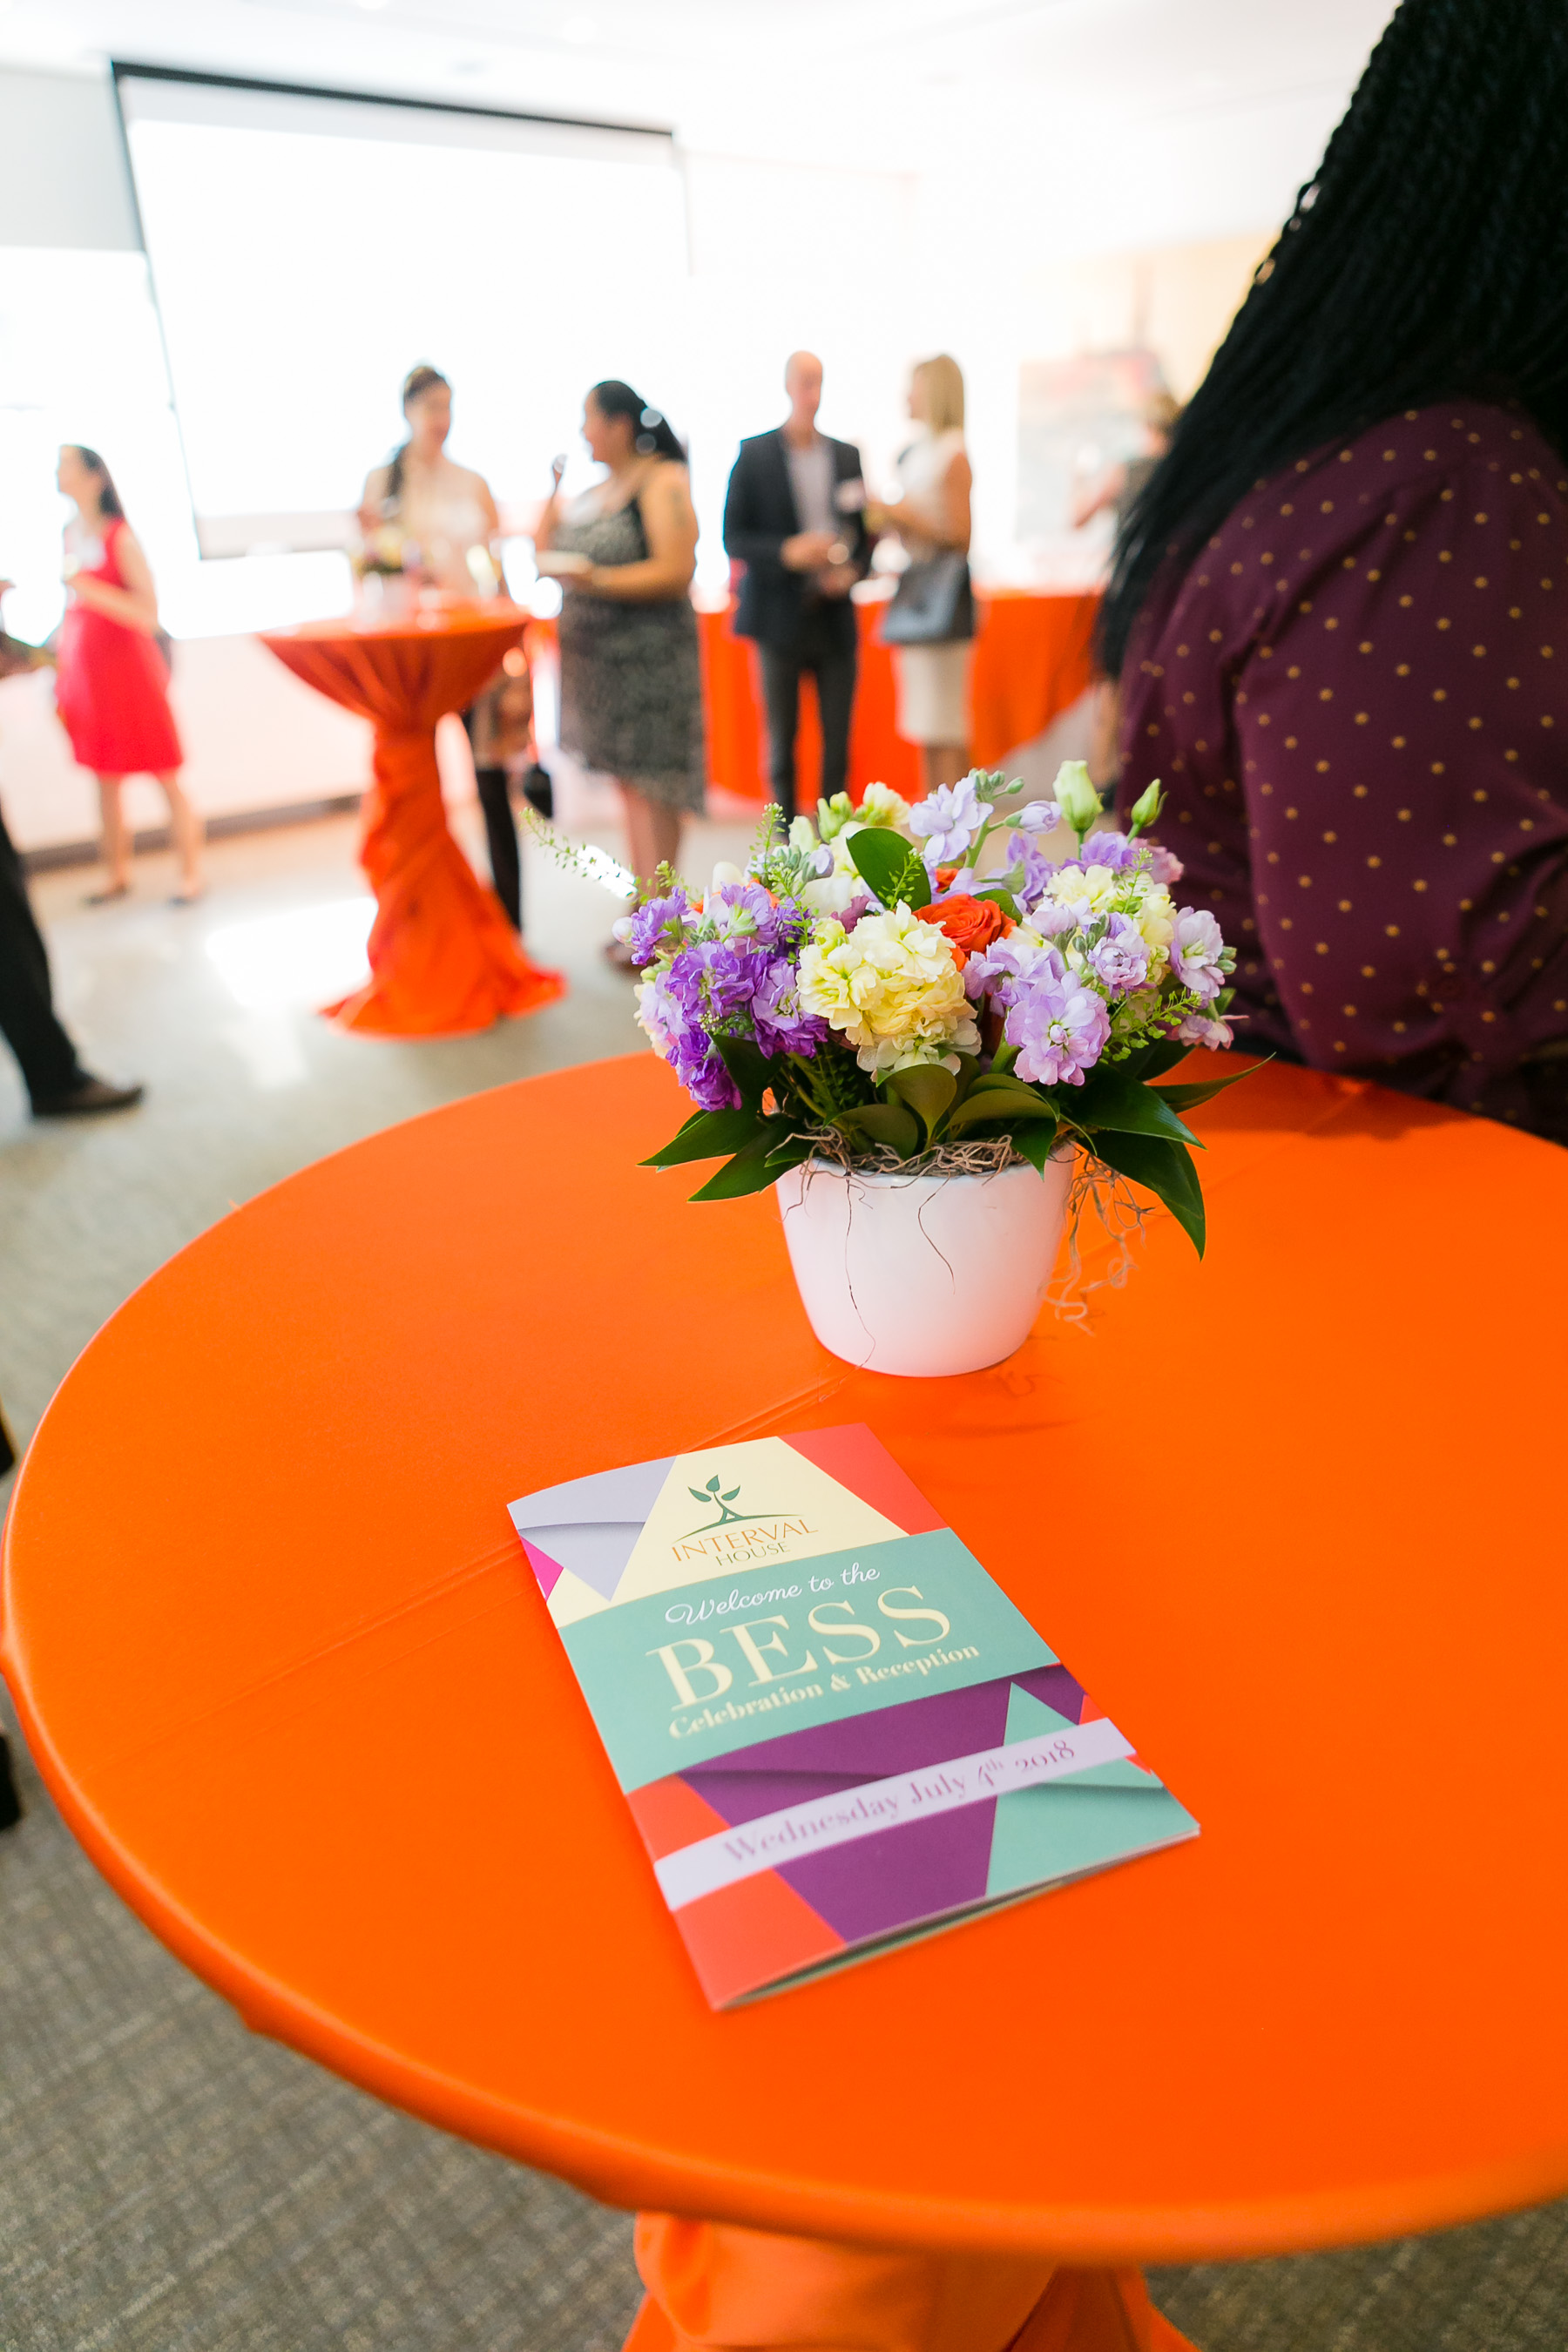 an orange table with a BESS brochure on it